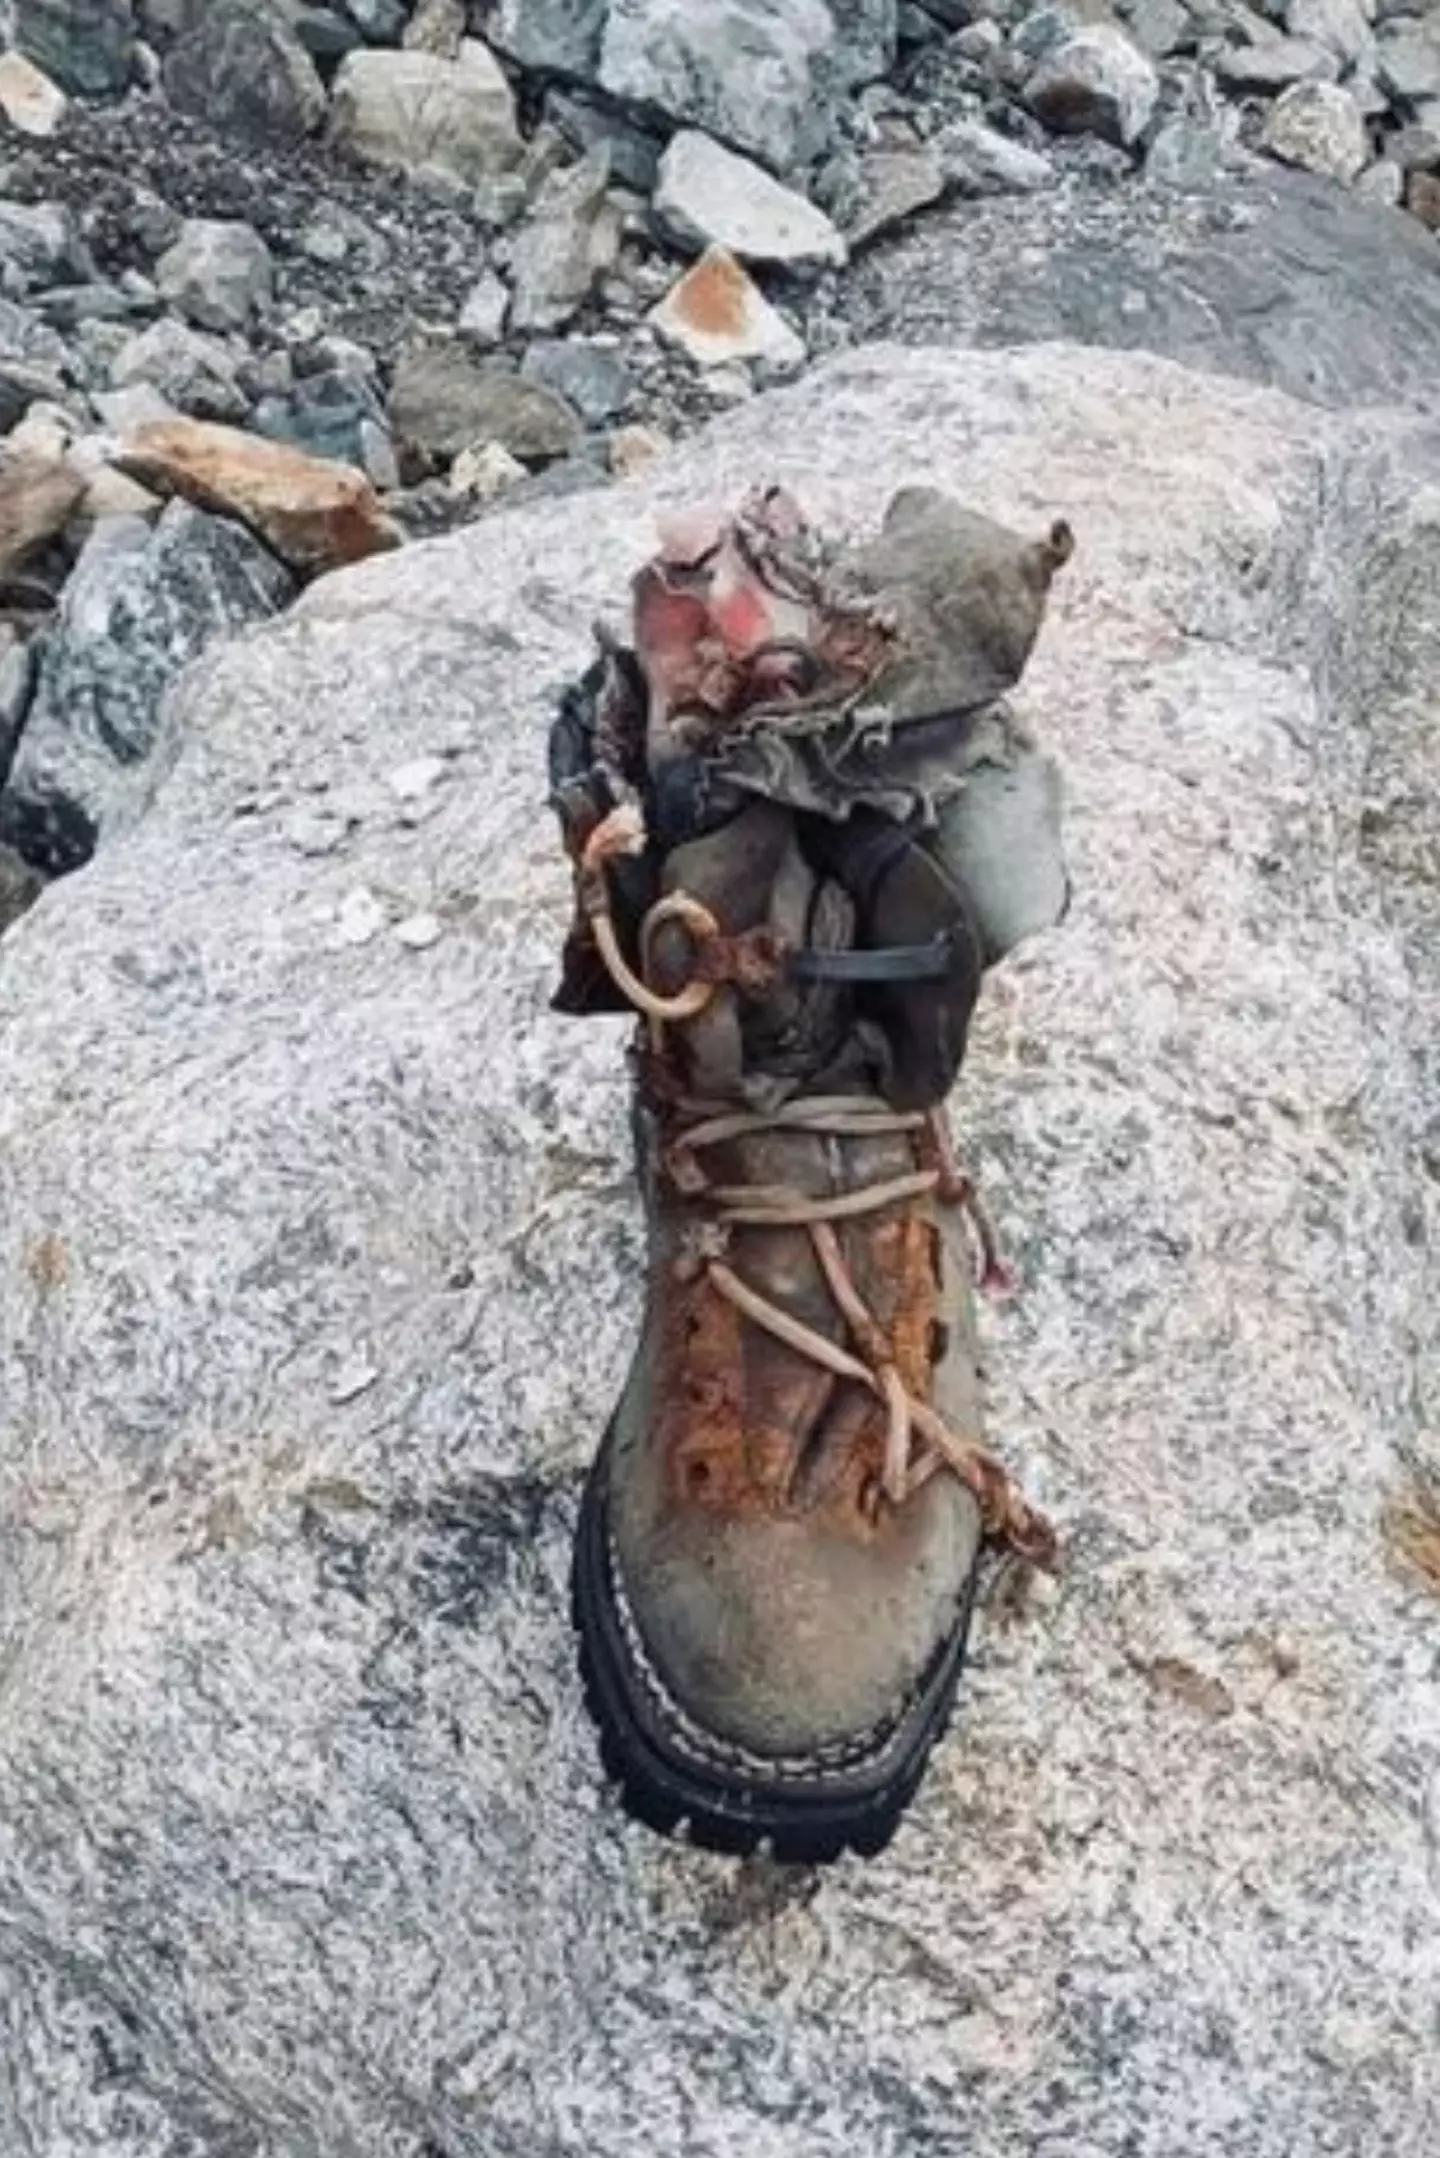 The location of Geunther Messner’s boot has proven his brother's innocence.